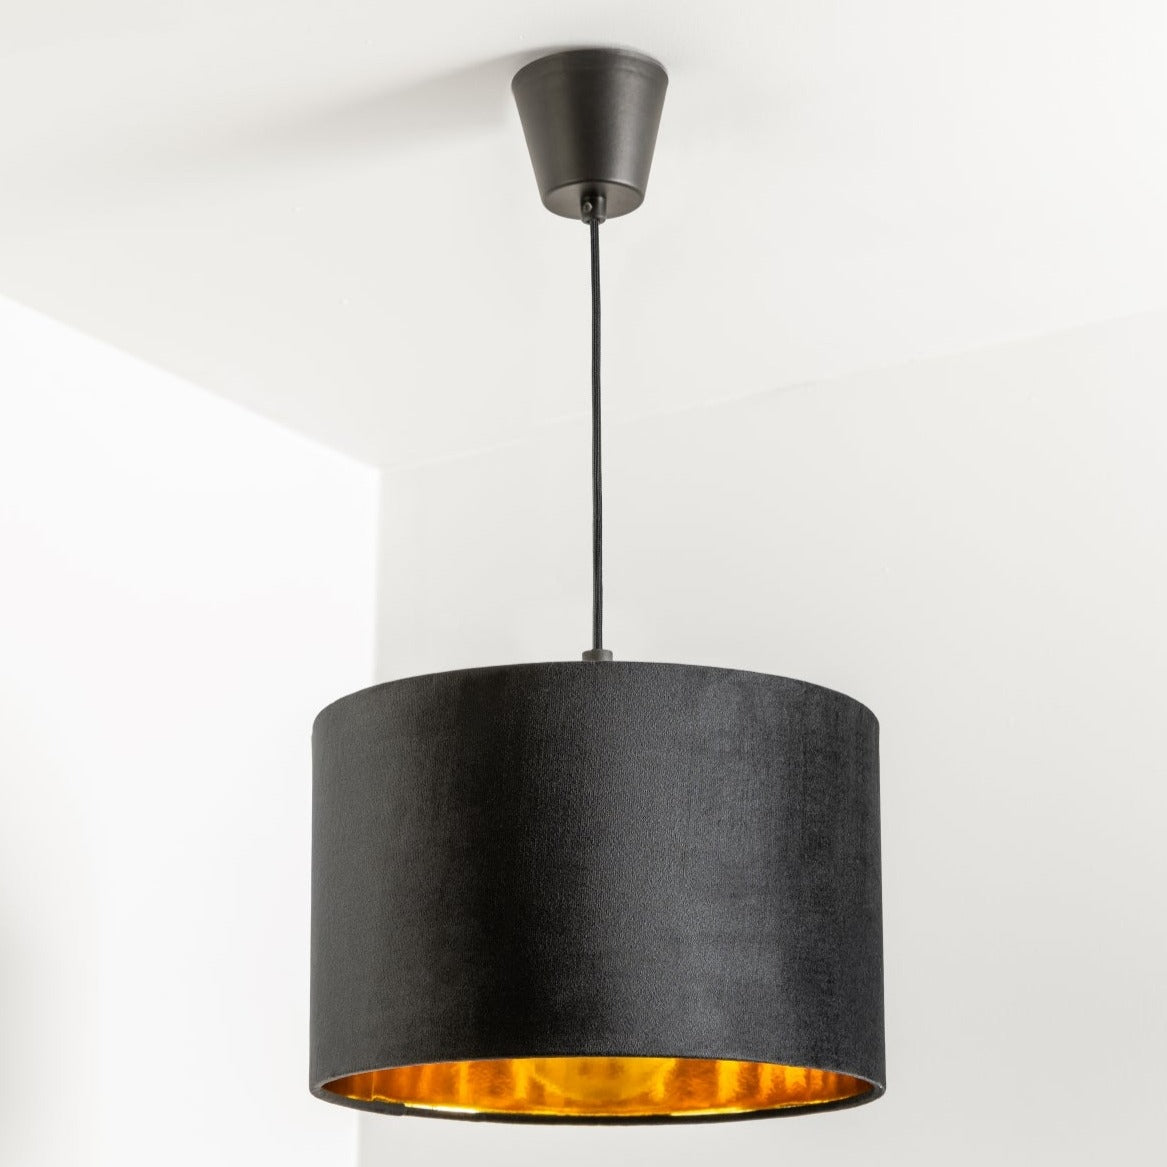 Our Nila velvet shade is sophisticated in appearance and we have designed the shade to  suit a range of interiors. Easy to fit, it’s crafted from high-quality velvet on the outer and has a reflective gold metallic inner. It's made to fit both a ceiling light or lamp base